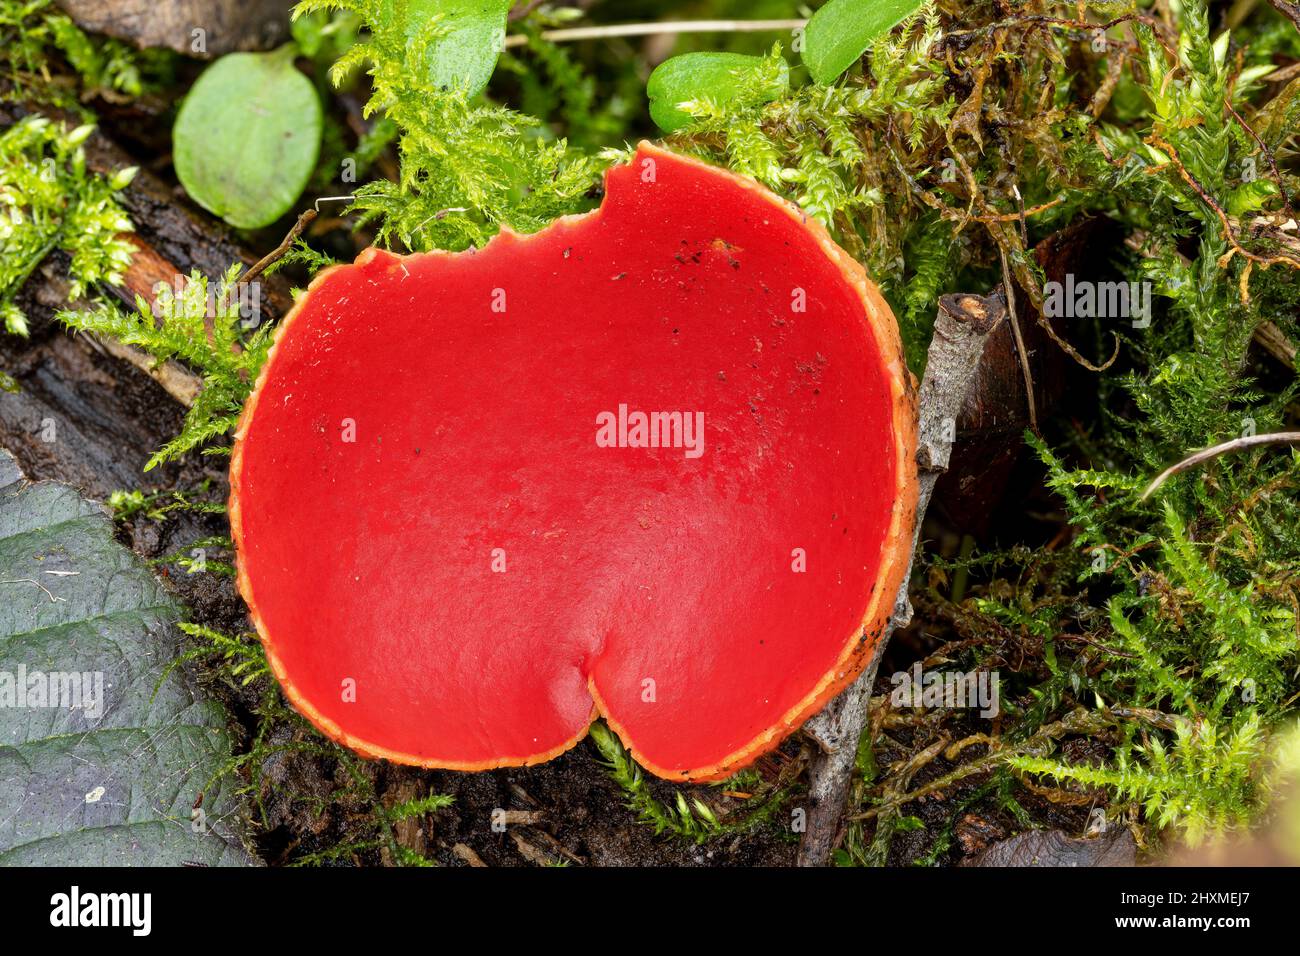 Sarcoscypha austriaca, Scarlet elf cup fungus in a winter woodland setting. Stock Photo